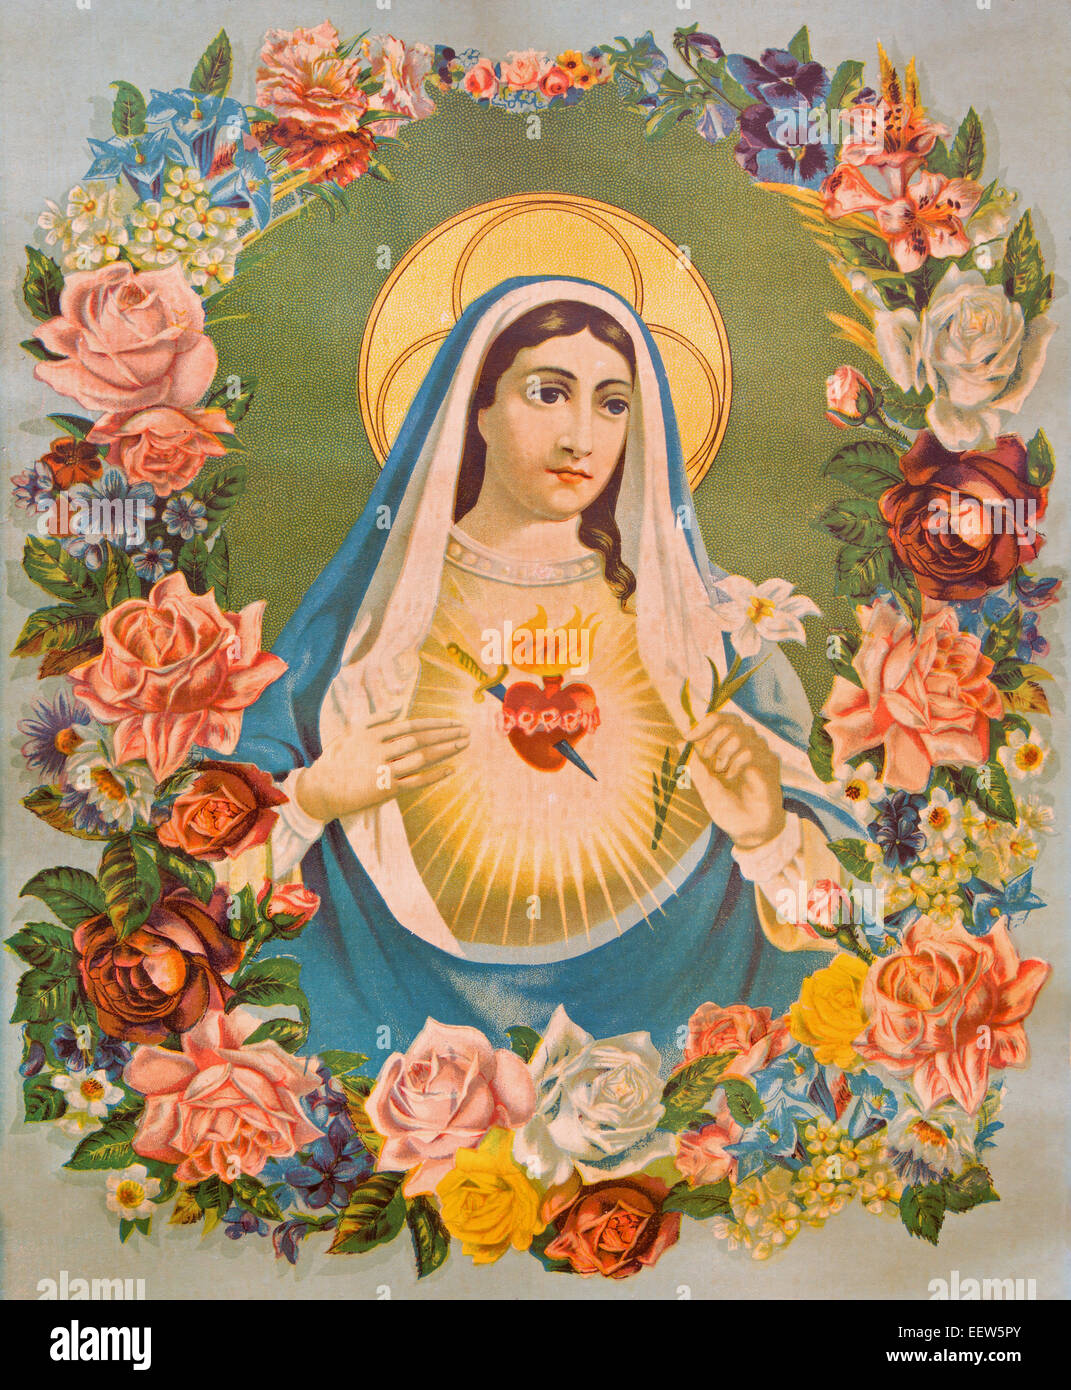 The Heart of Virgin Mary in the flowers. Typical catholic image ...